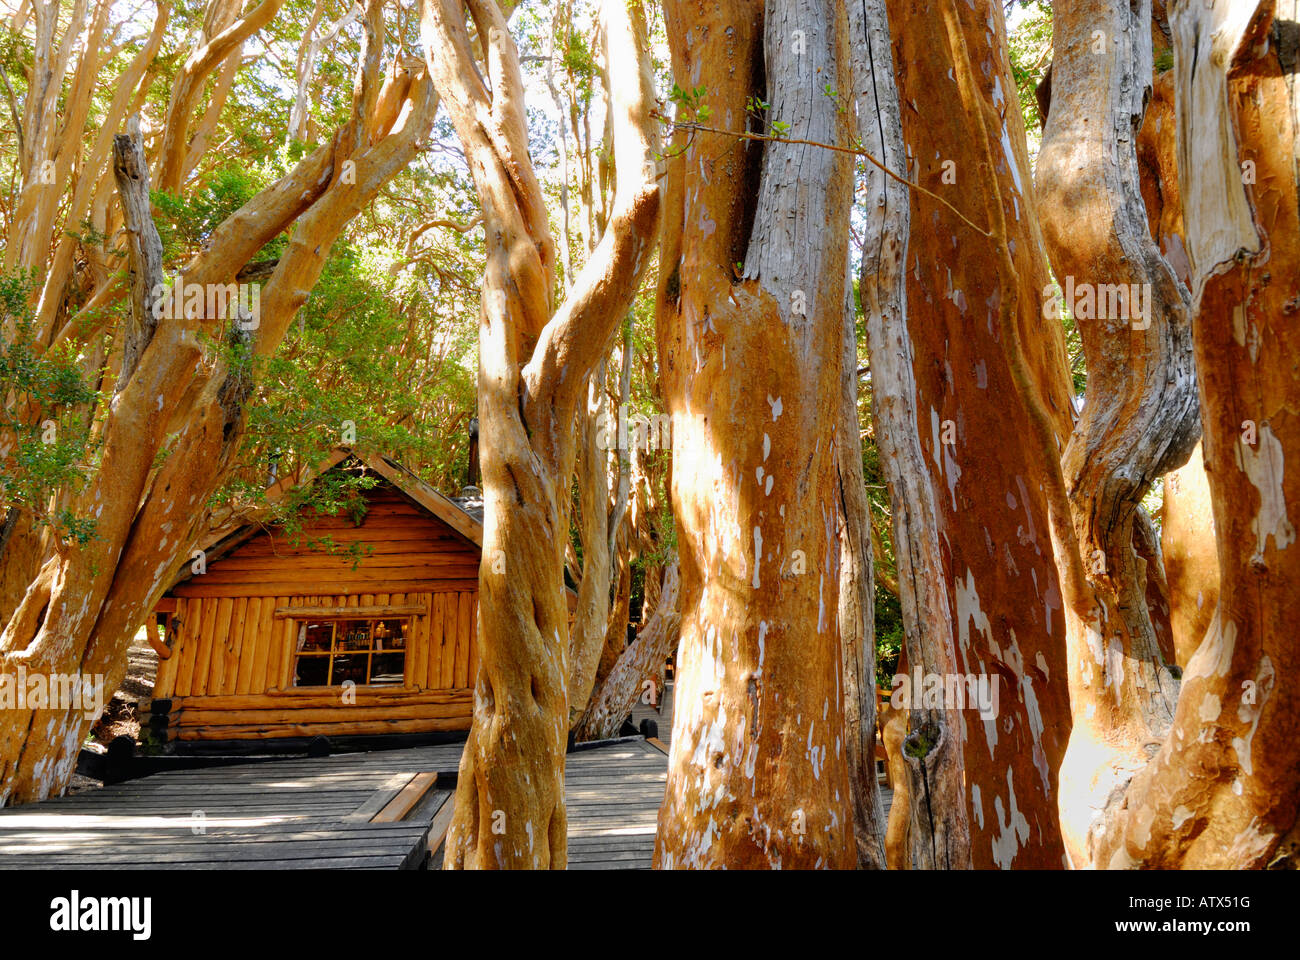 Old Cabin in the woods, Los Arrayanes National Park, Peninsula de Quetrihue, Neuquen, Argentina, South America Stock Photo